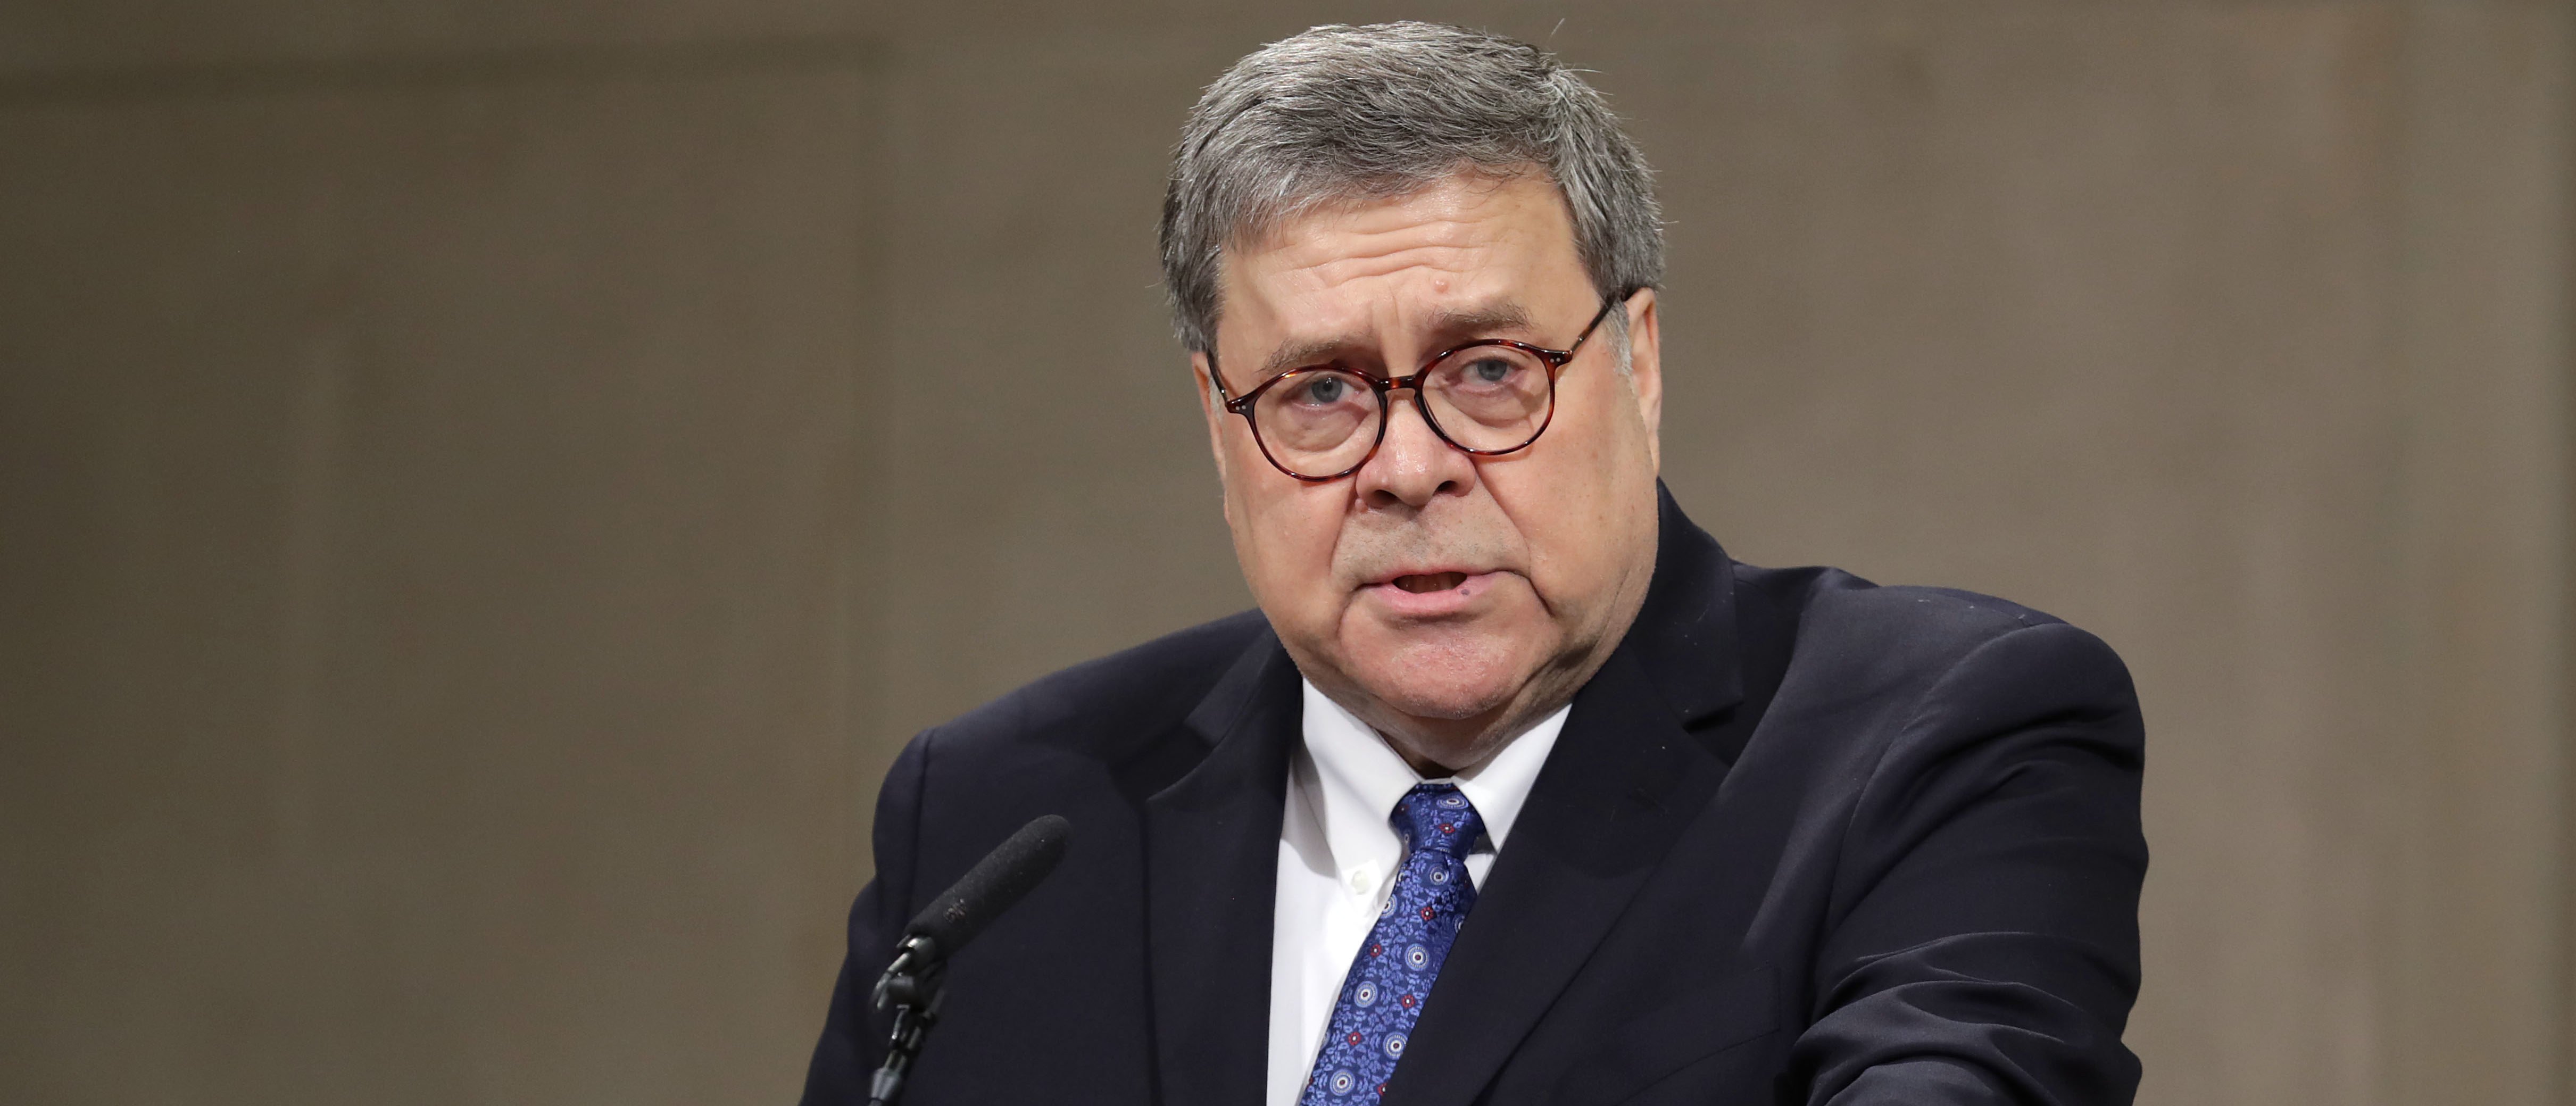 U.S. Attorney General William Barr delivers remarks during a farewell ceremony for Deputy Attorney General Rod Rosenstein at the Robert F. Kennedy Main Justice Building May 09, 2019 in Washington, DC. (Chip Somodevilla/Getty Images)